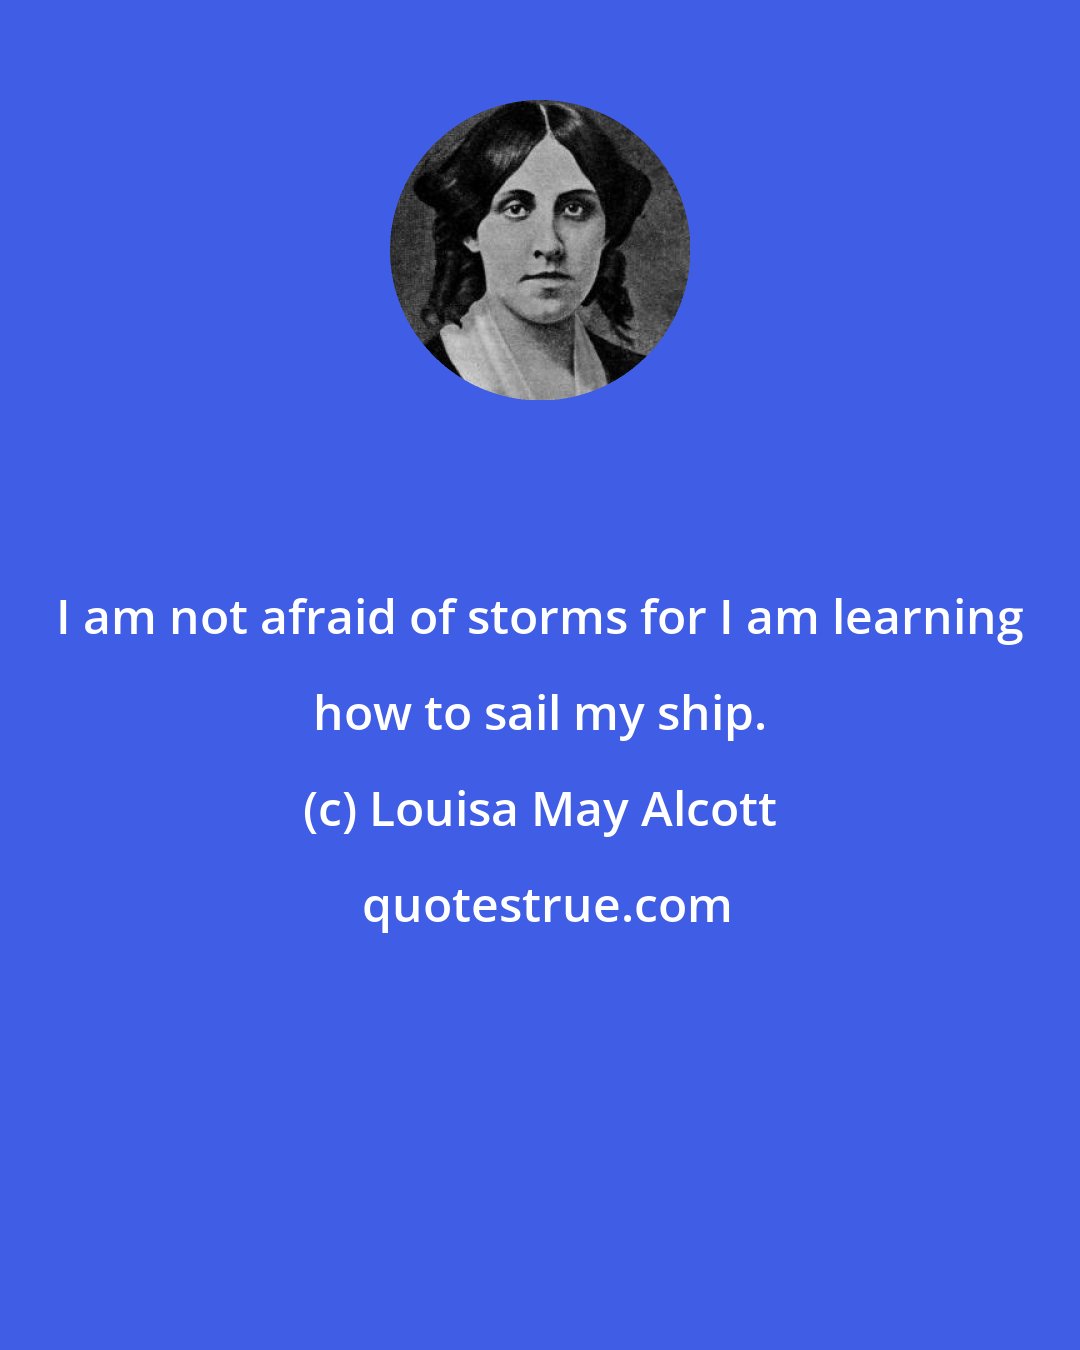 Louisa May Alcott: I am not afraid of storms for I am learning how to sail my ship.